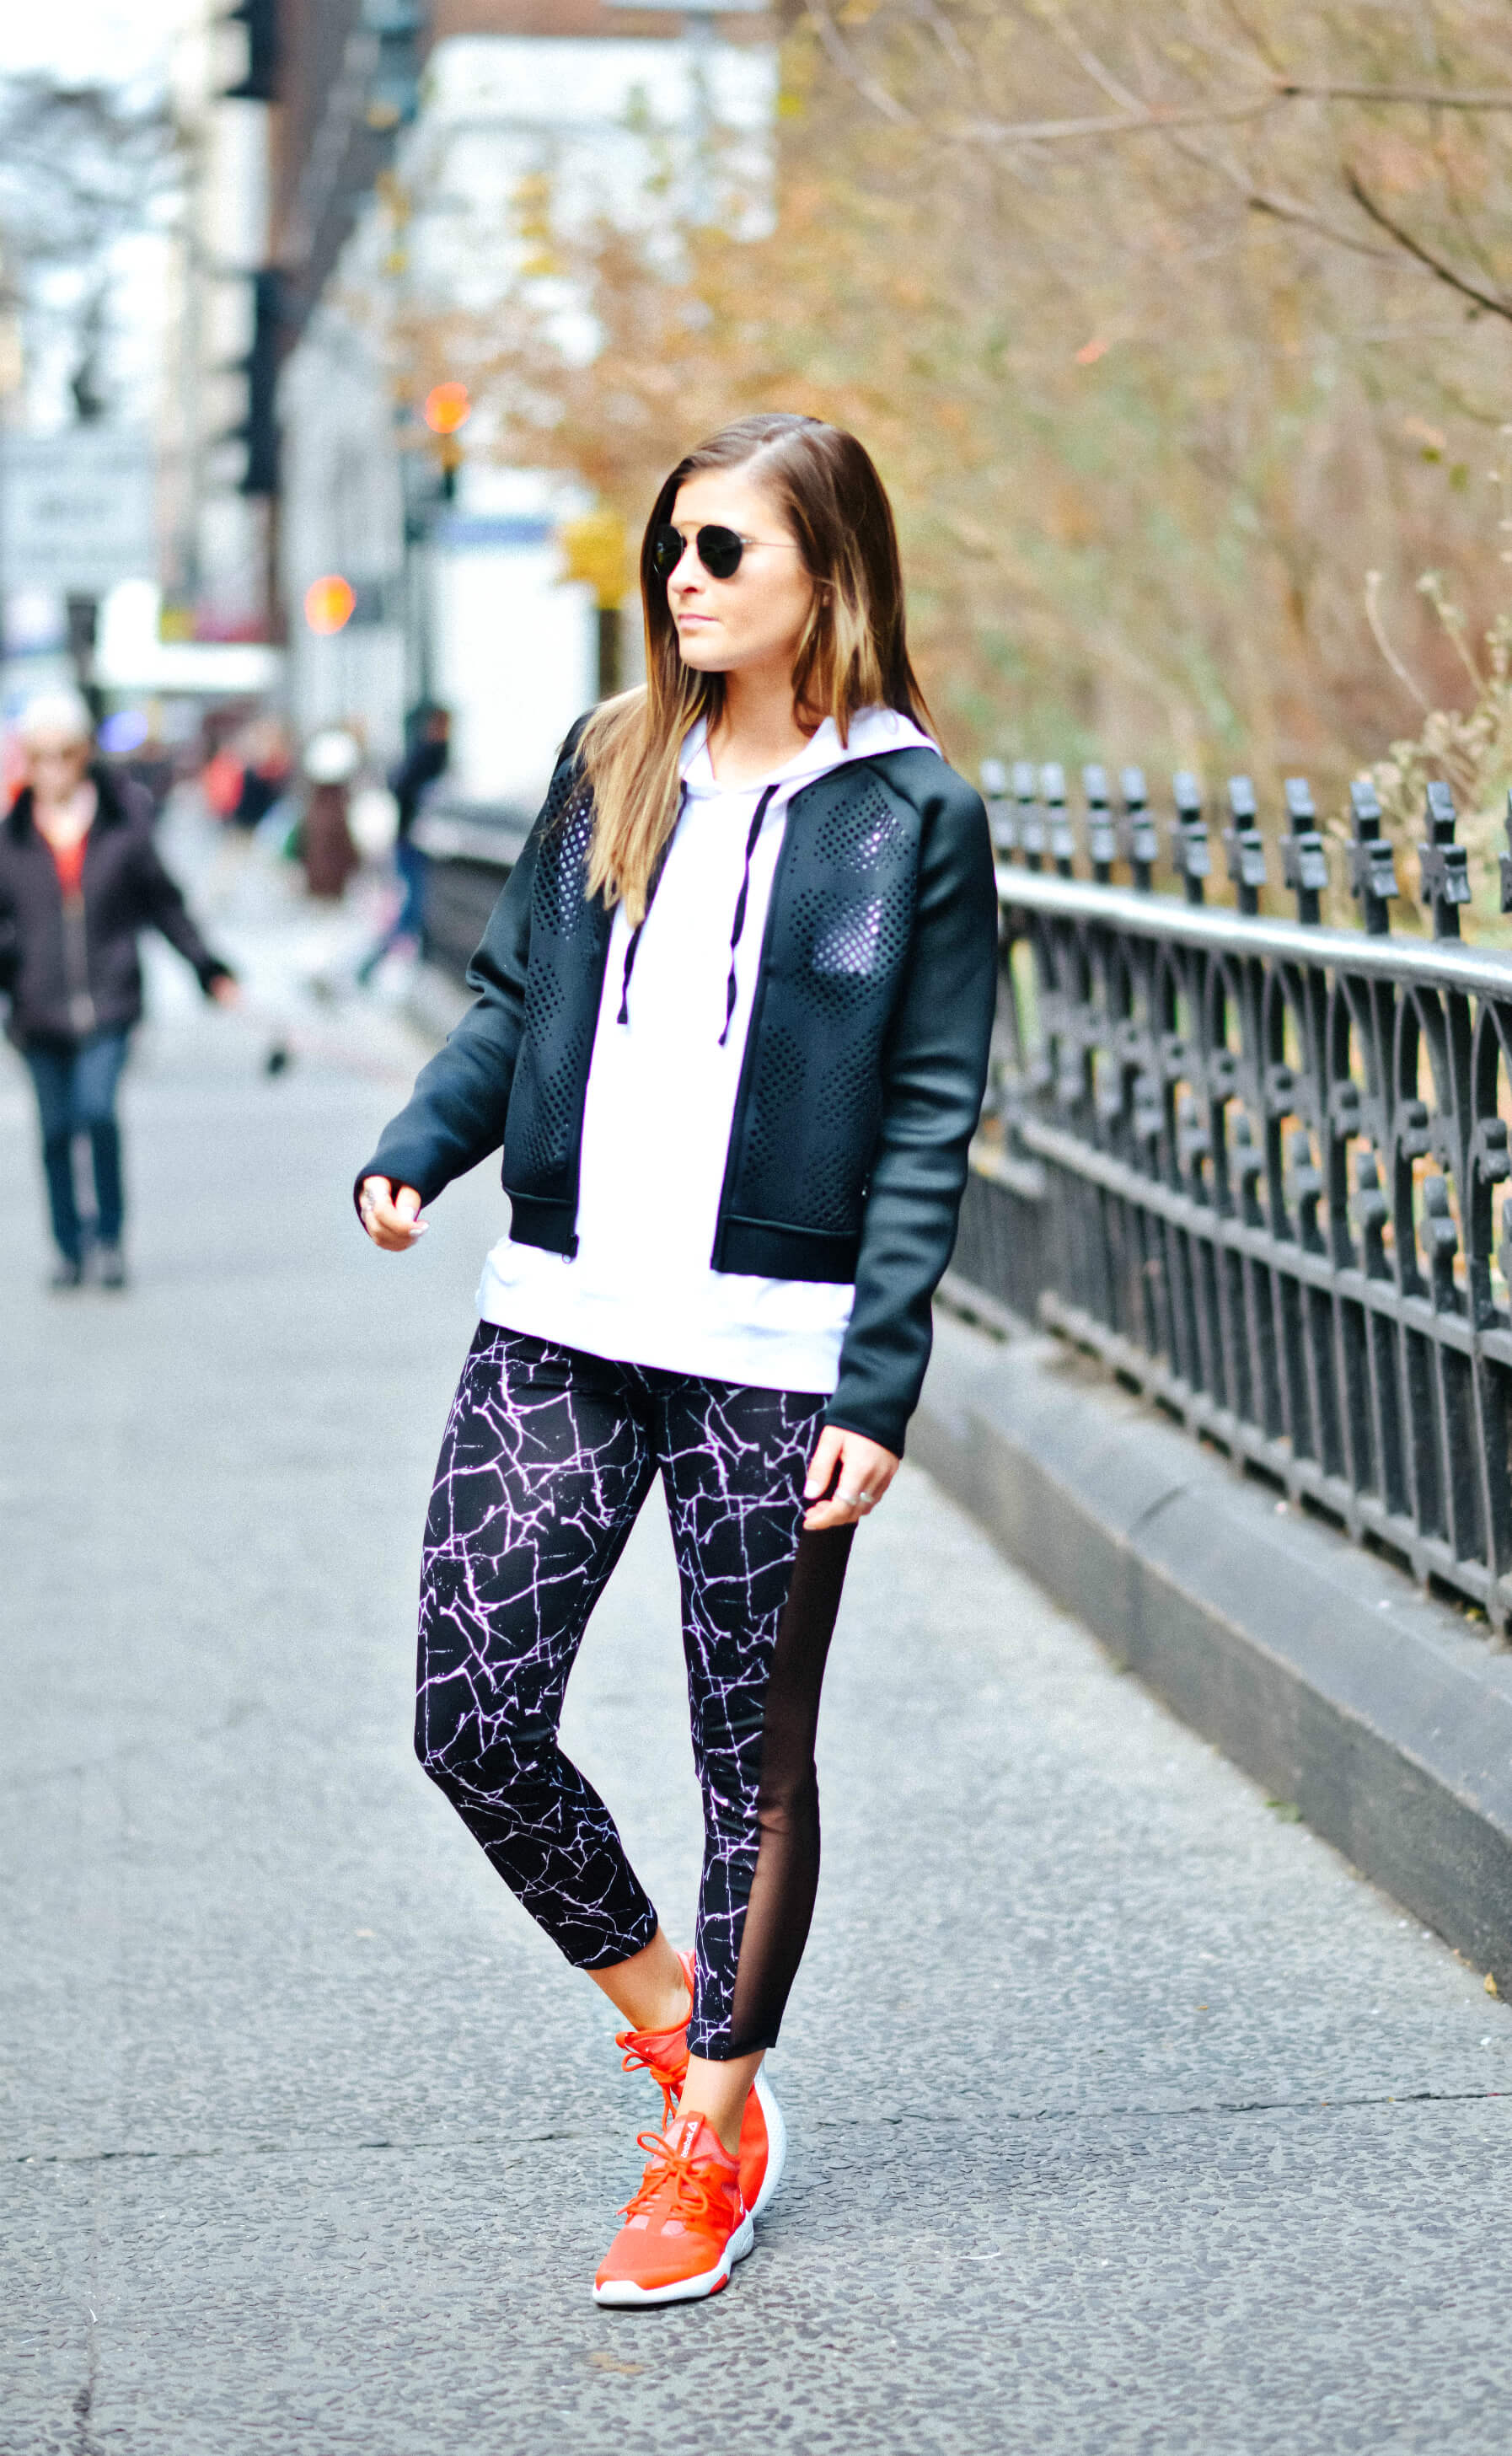 Marbled Approach To Athleisure